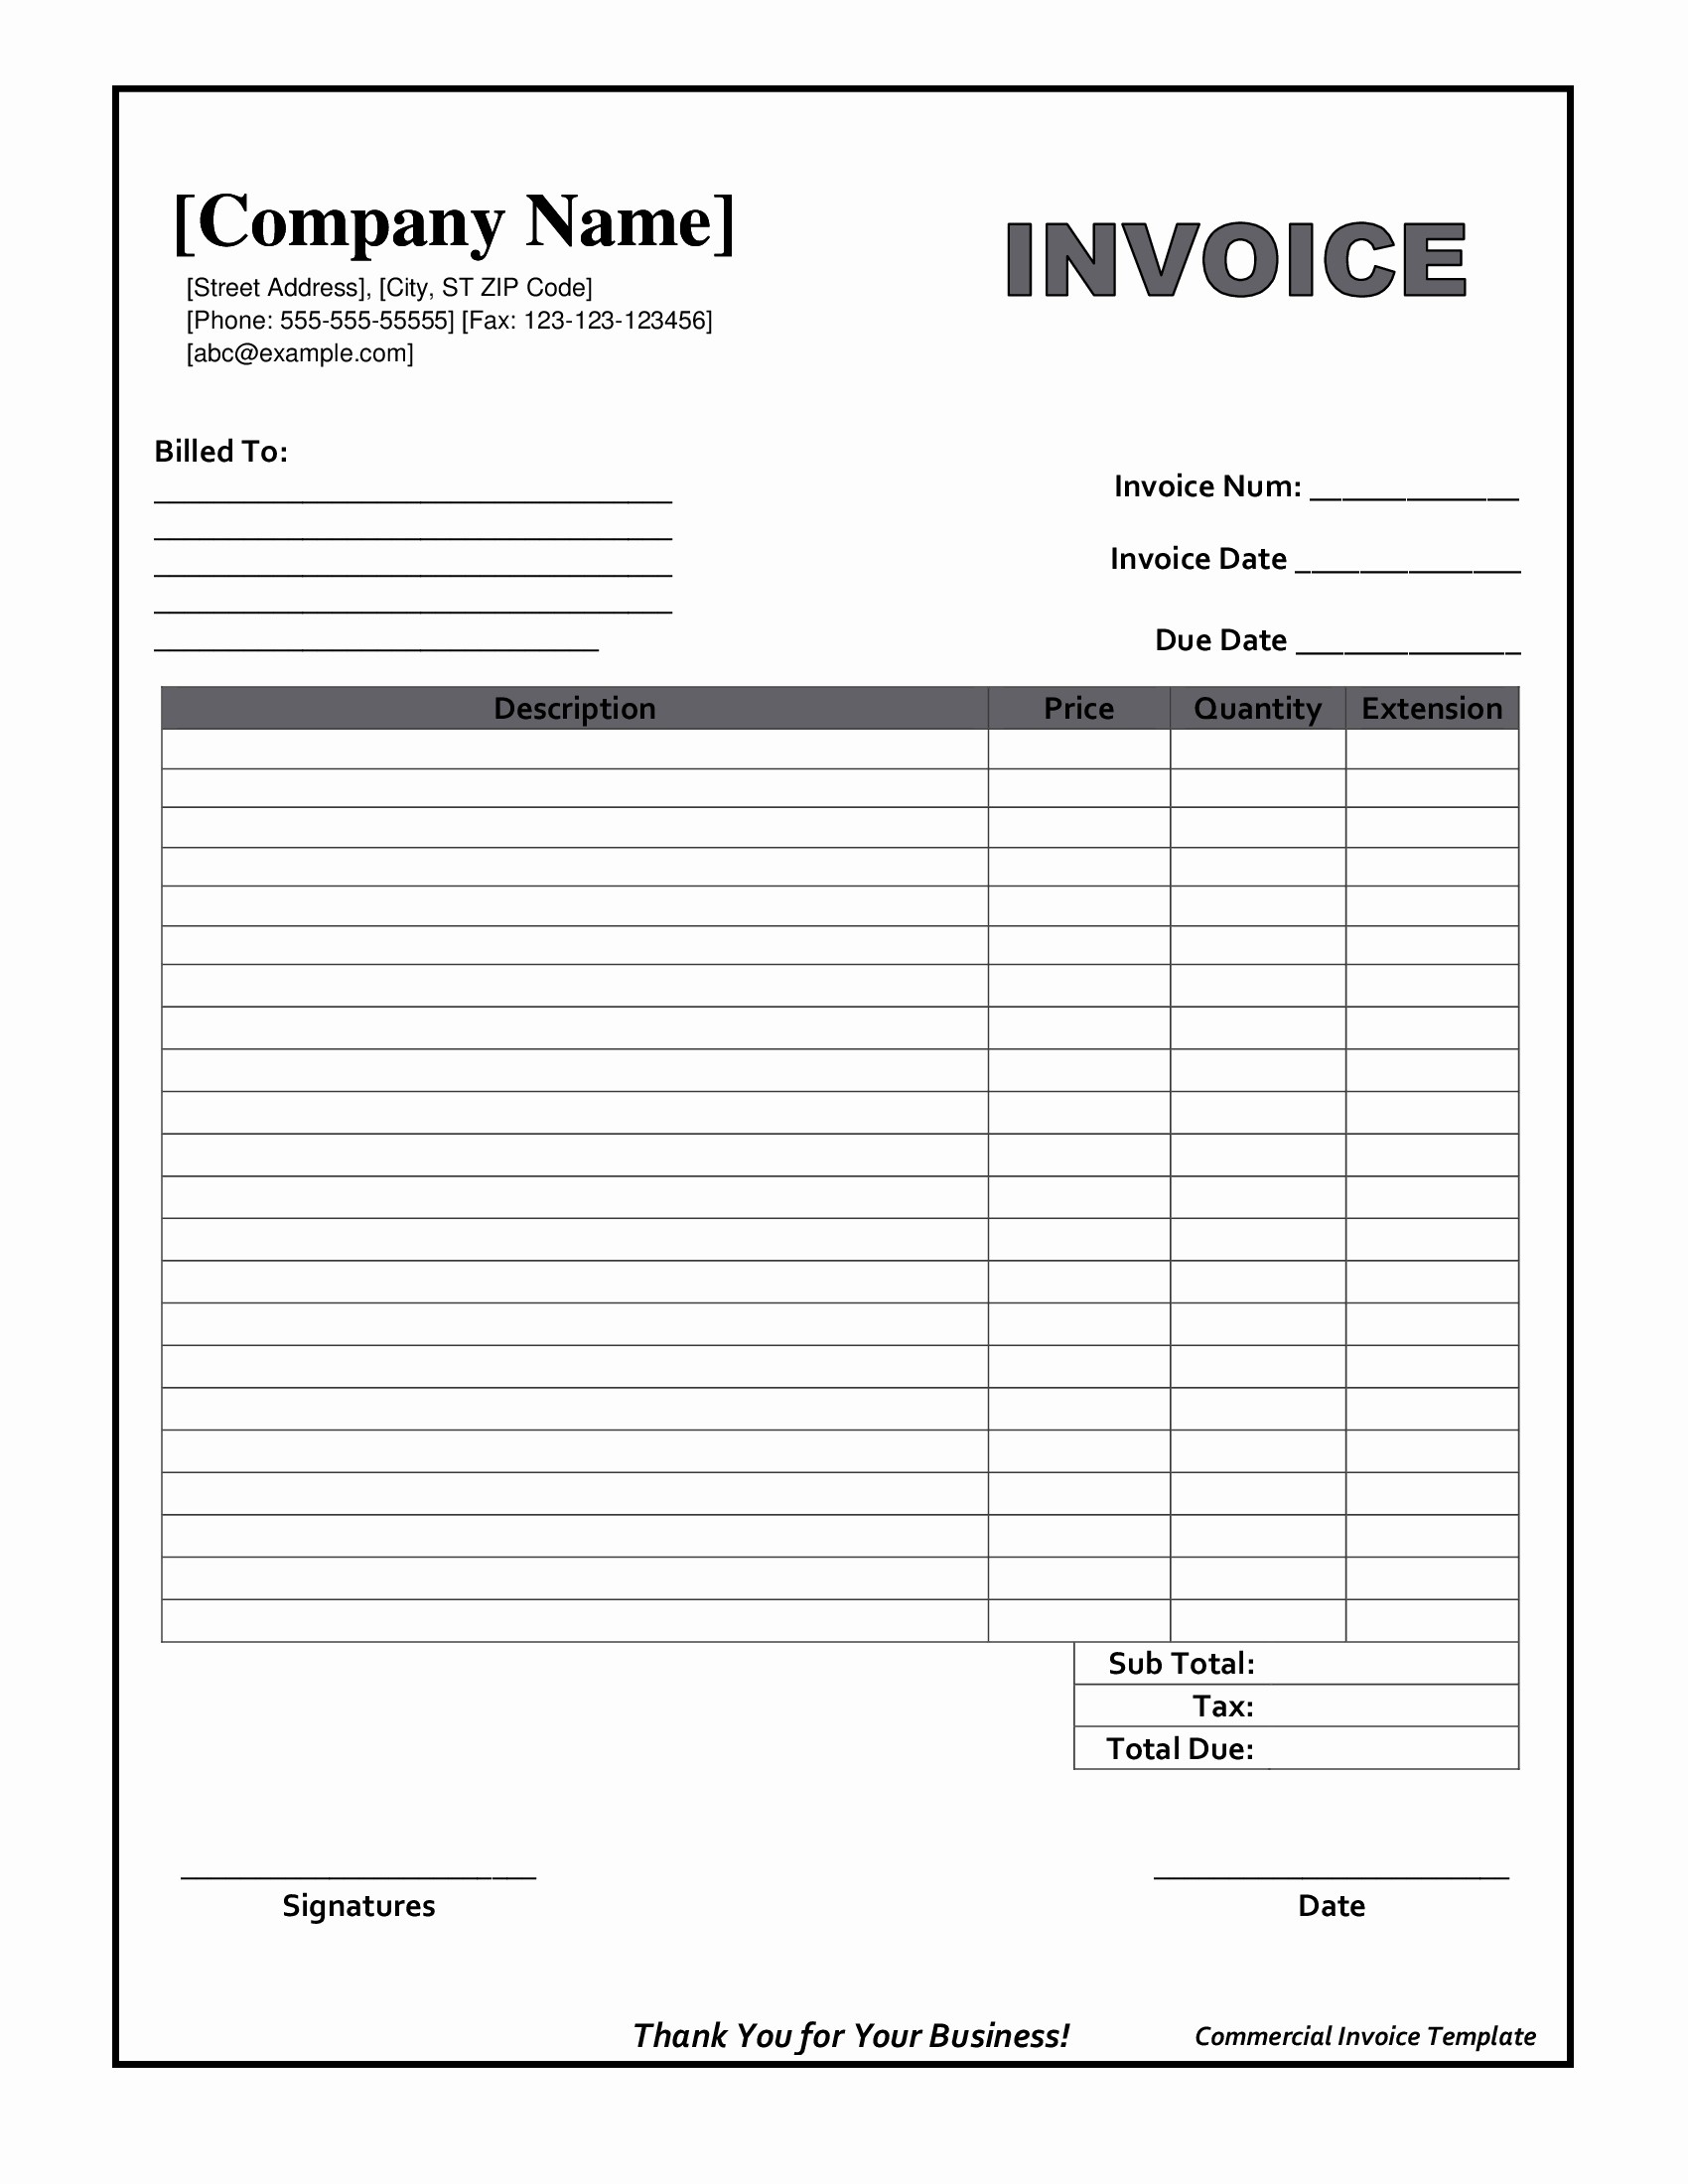 Free Blank Invoice Template Word Fresh Blank Invoice form Free